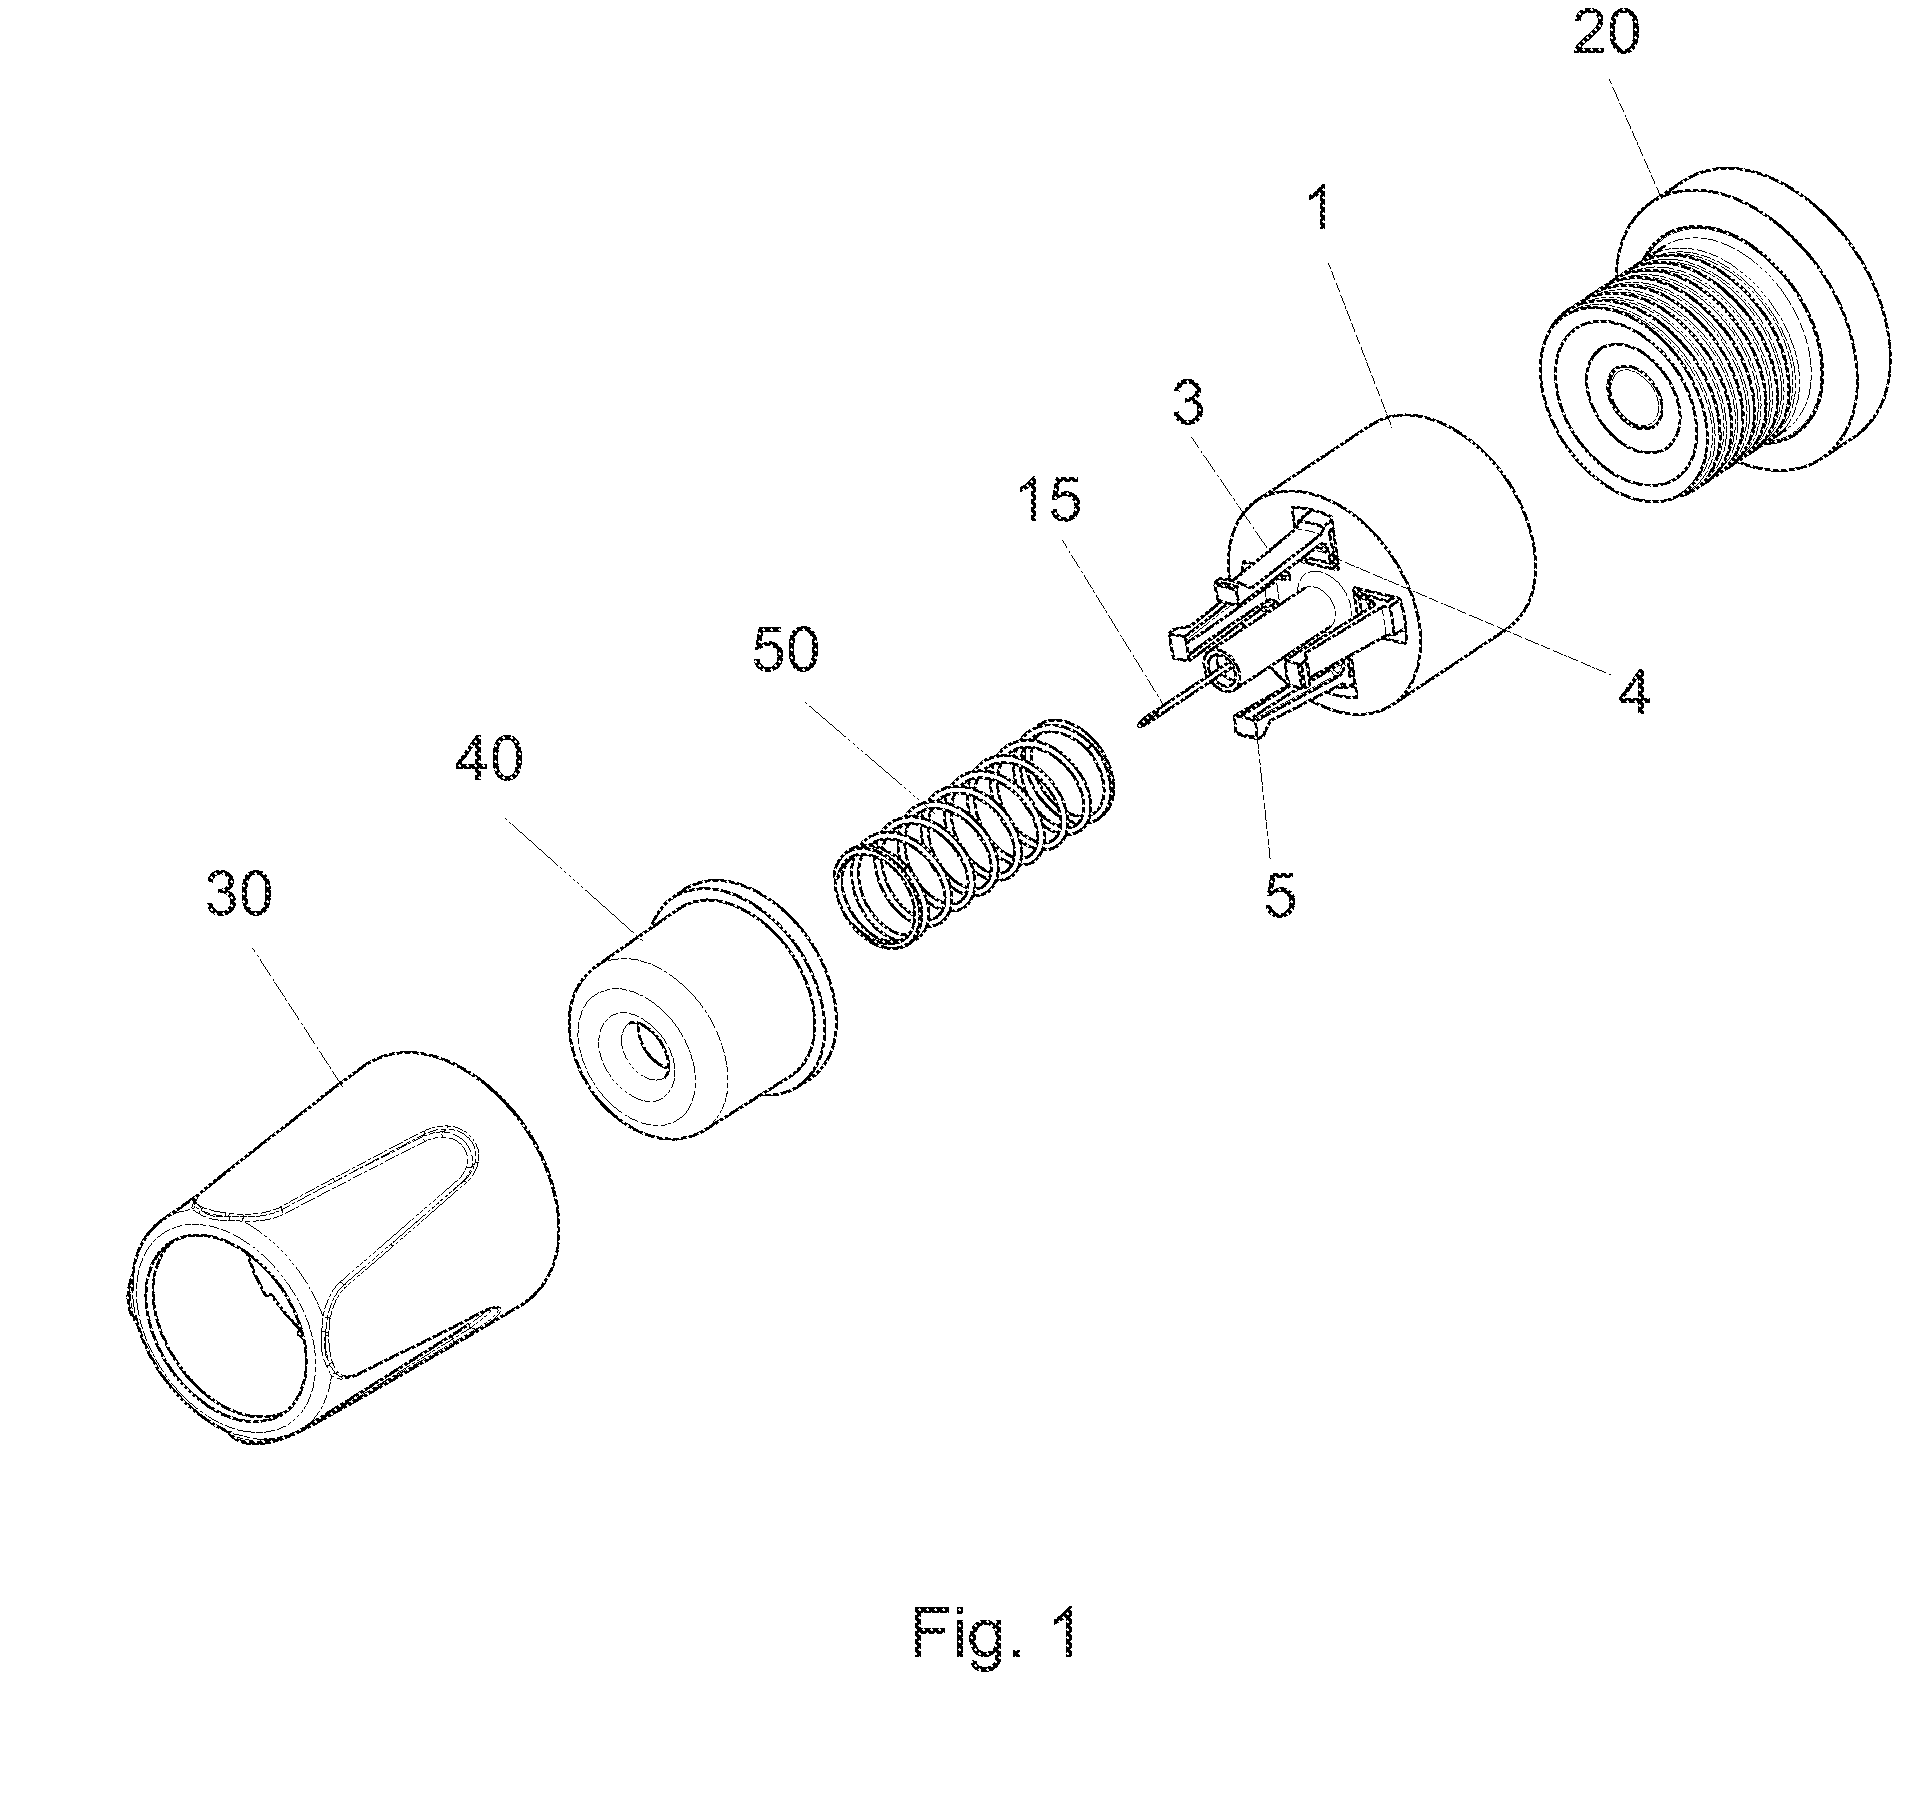 Shieldable needle assembly with biased safety shield